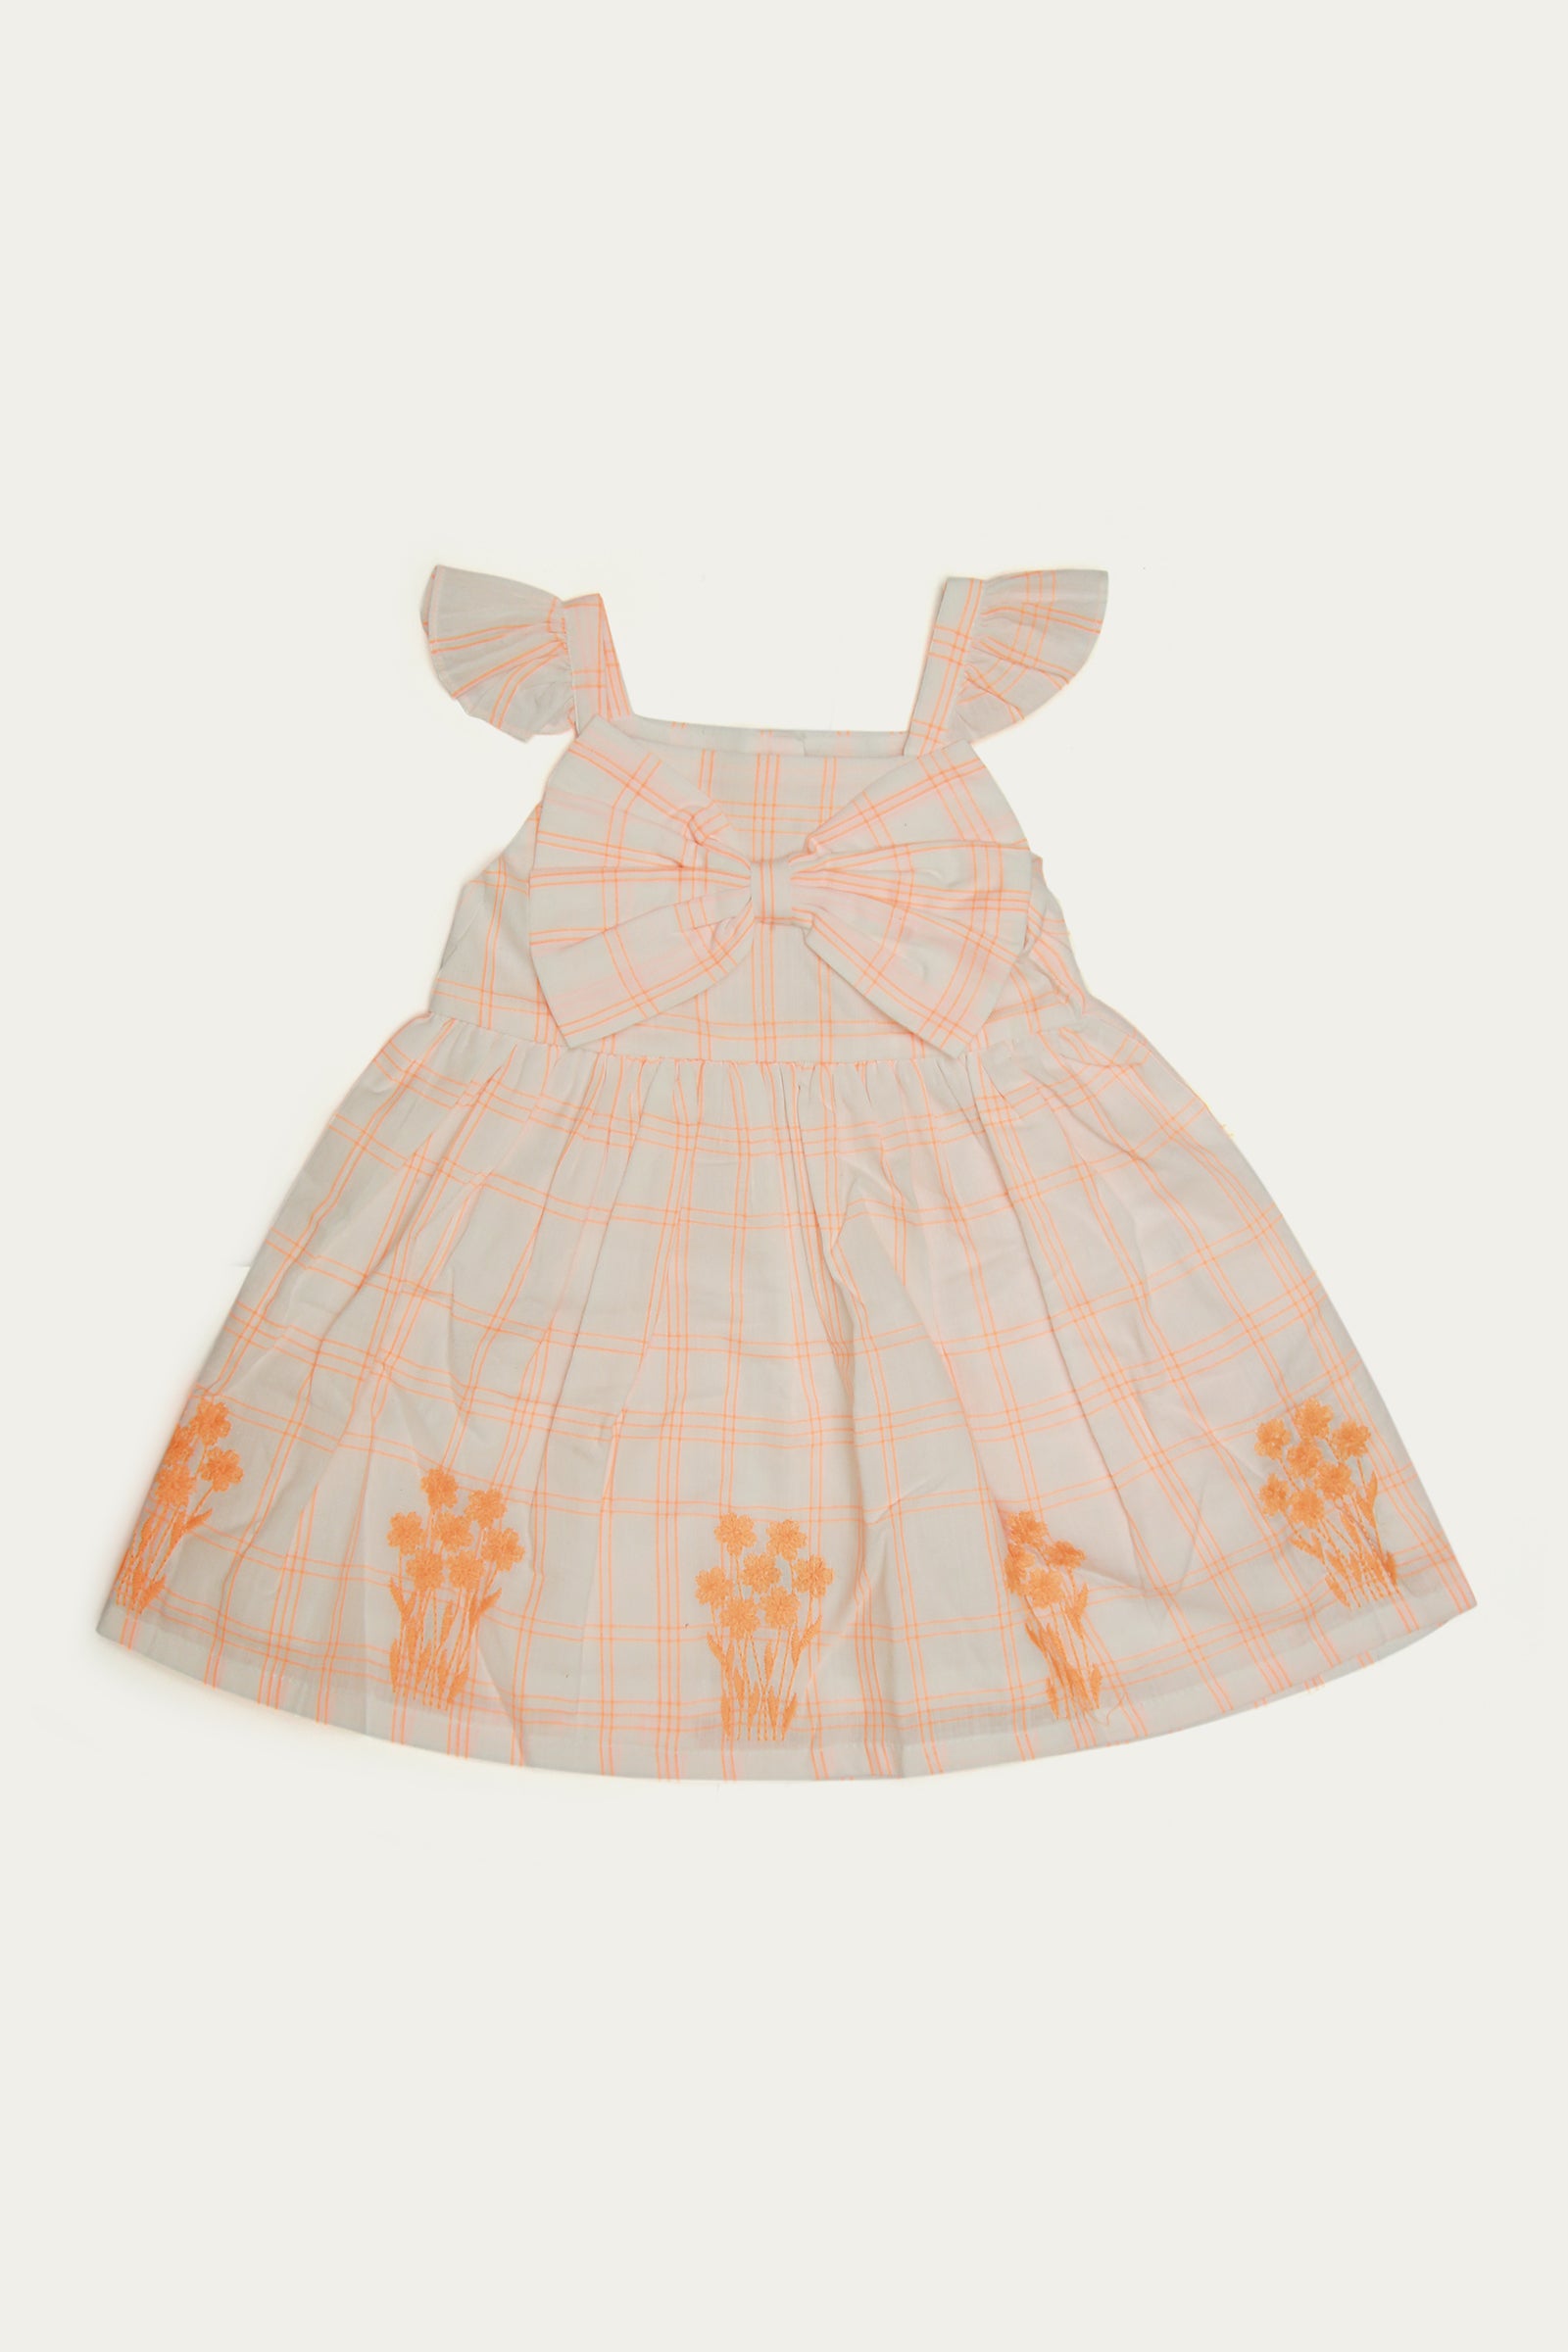 Embroidered Frock with Diaper Cover (IF-388)